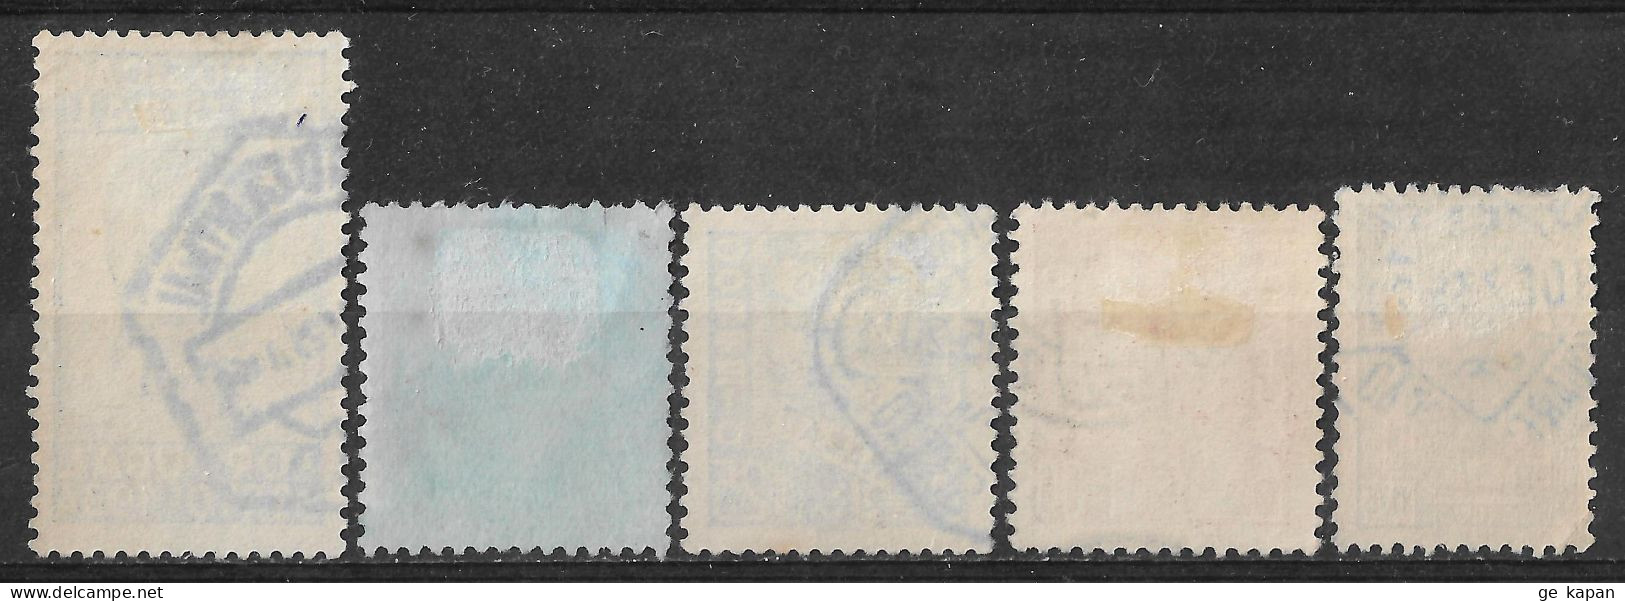 1934-1935 PORTUGAL SET OF 5 USED STAMPS (Michel # 580,585x,586,588,589) CV €22.30 - Gebraucht